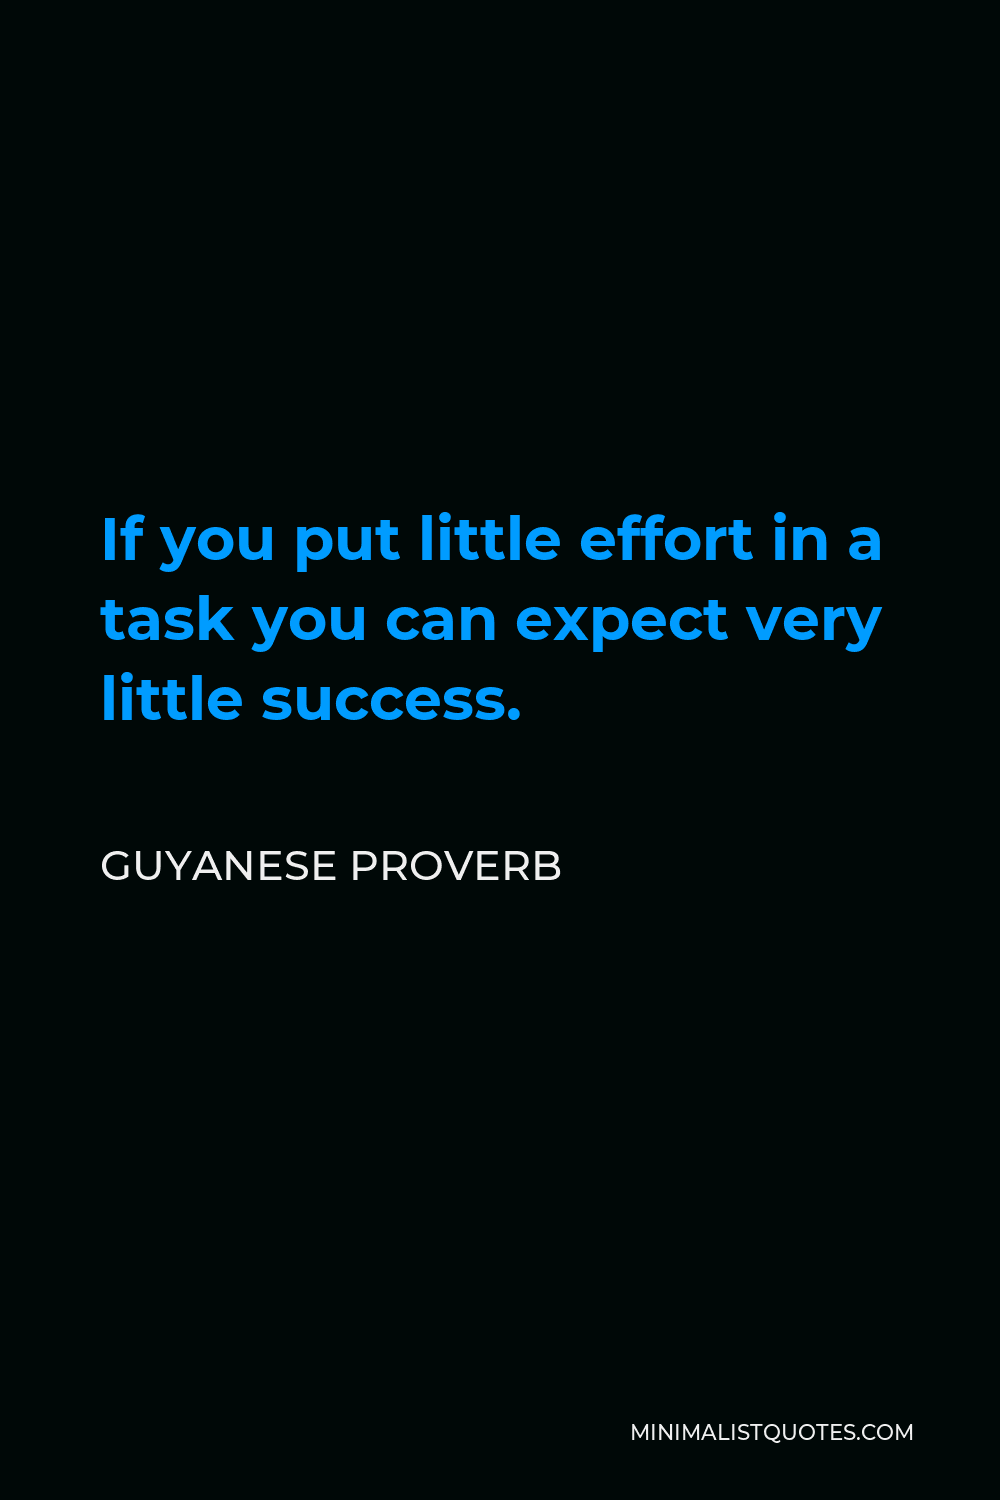 Guyanese Proverb Quote - If you put little effort in a task you can expect very little success.